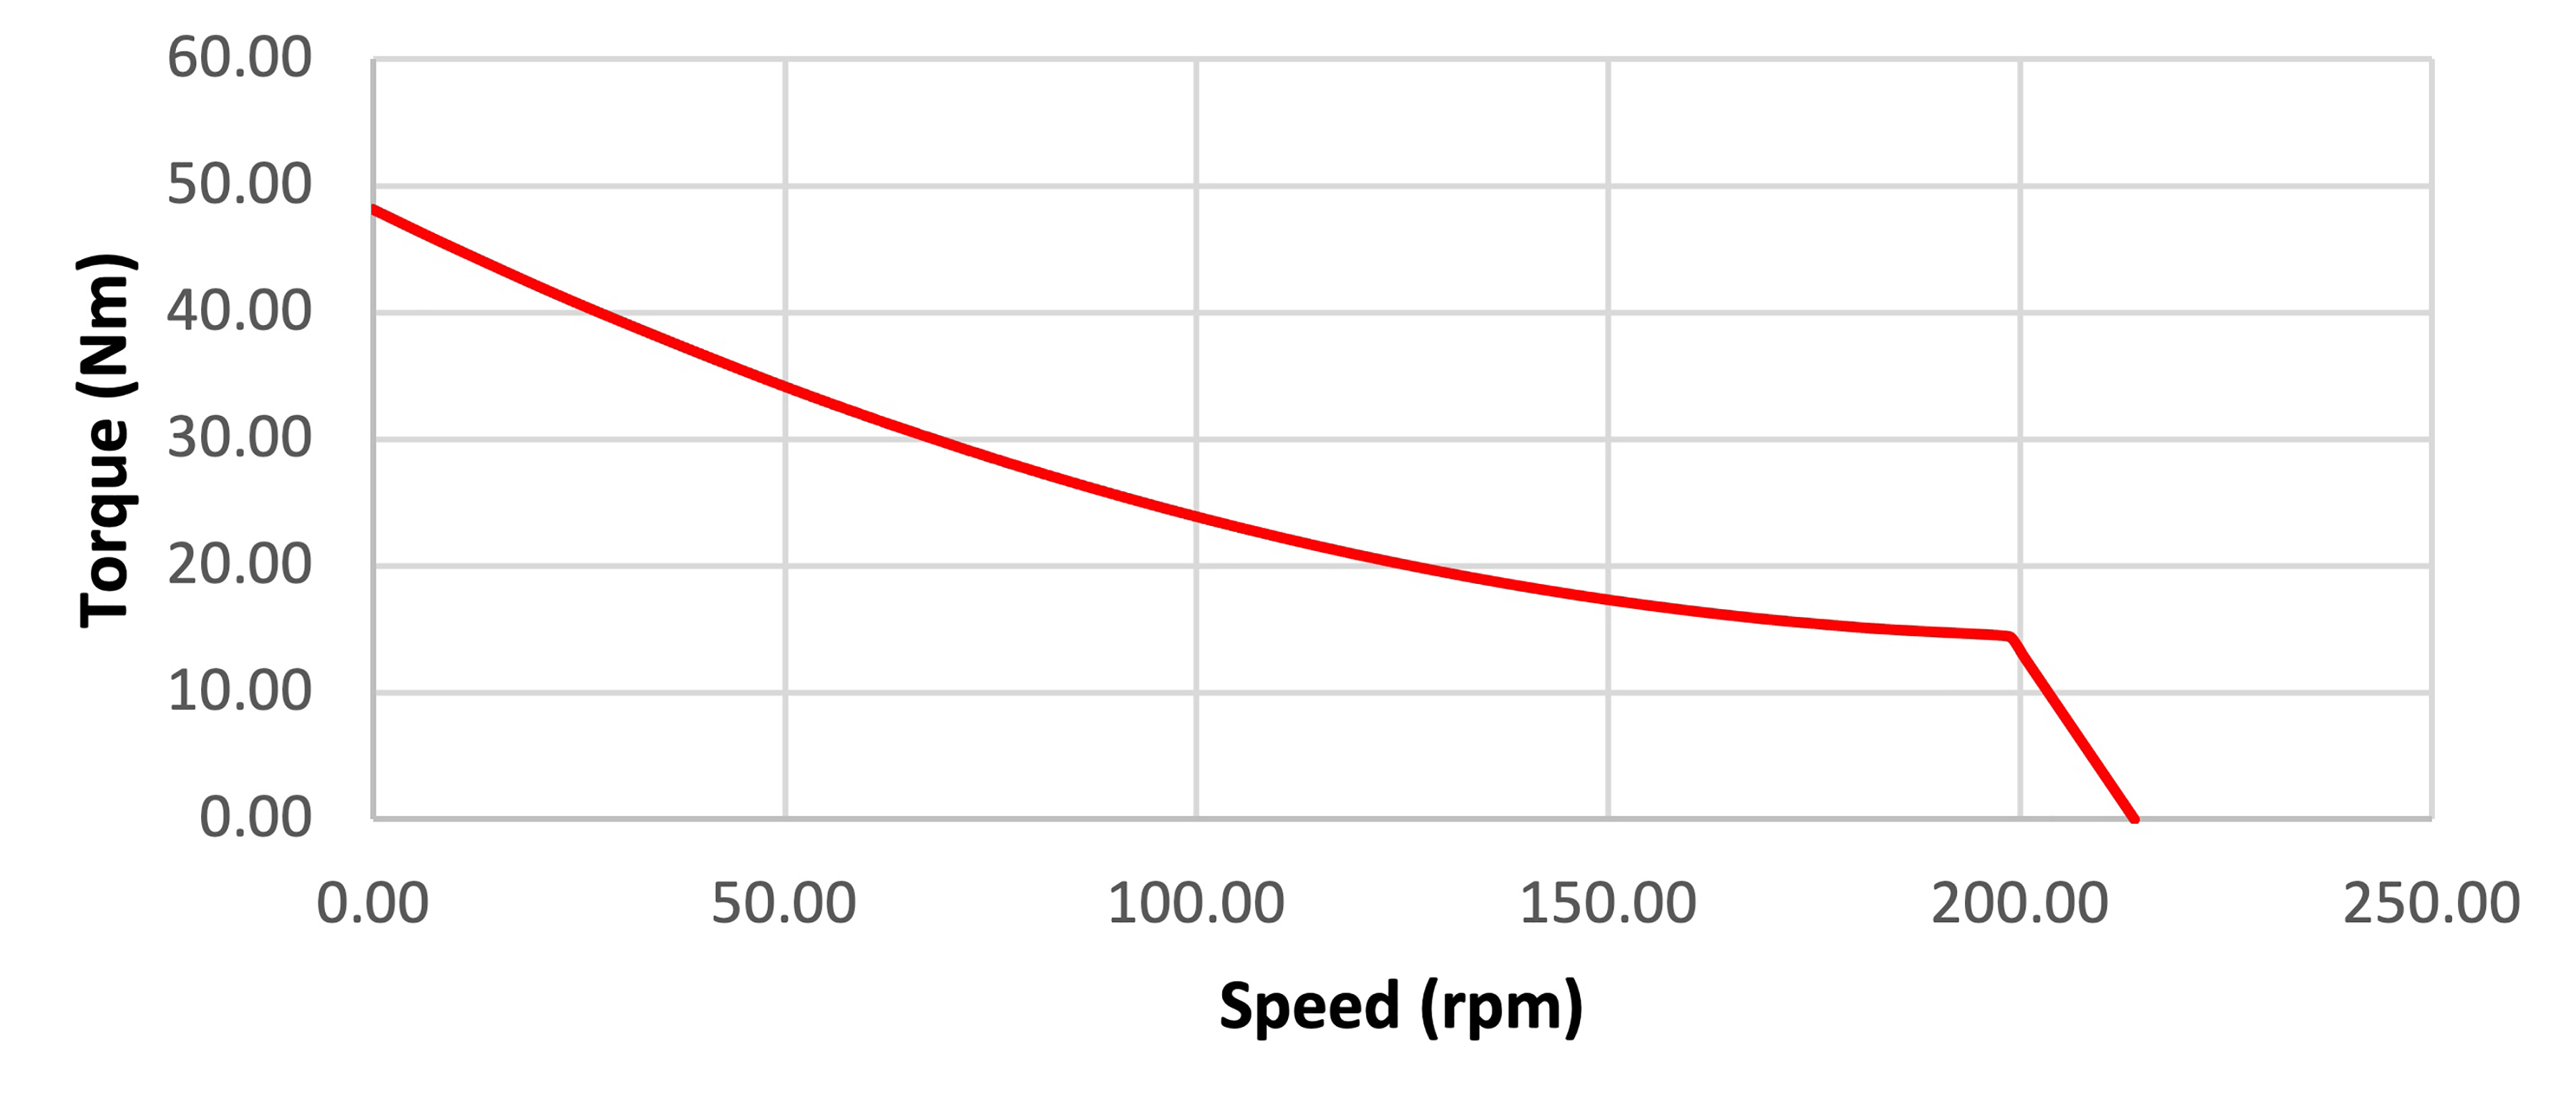 Graph 1: Typical Hub Motor Performance Curve (Torque vs Speed)